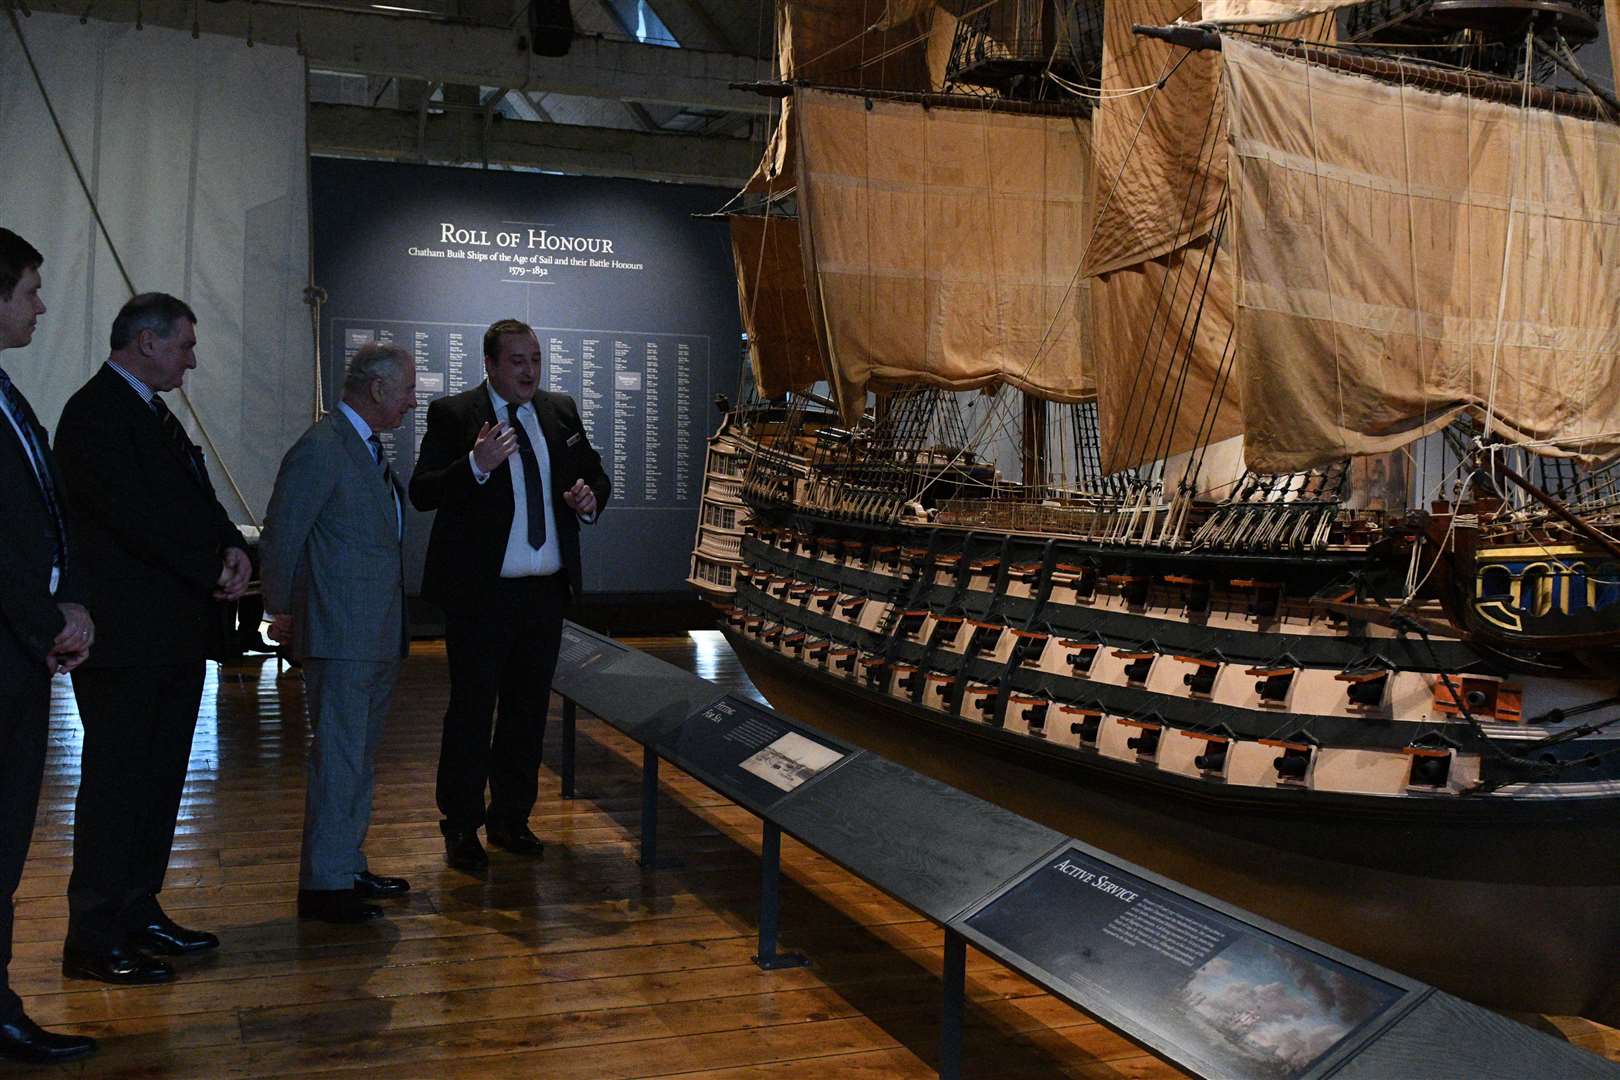 HRH touring the Command of the Ocean galleries, including the model of HMS Victory. Picture: Barry Goodwin